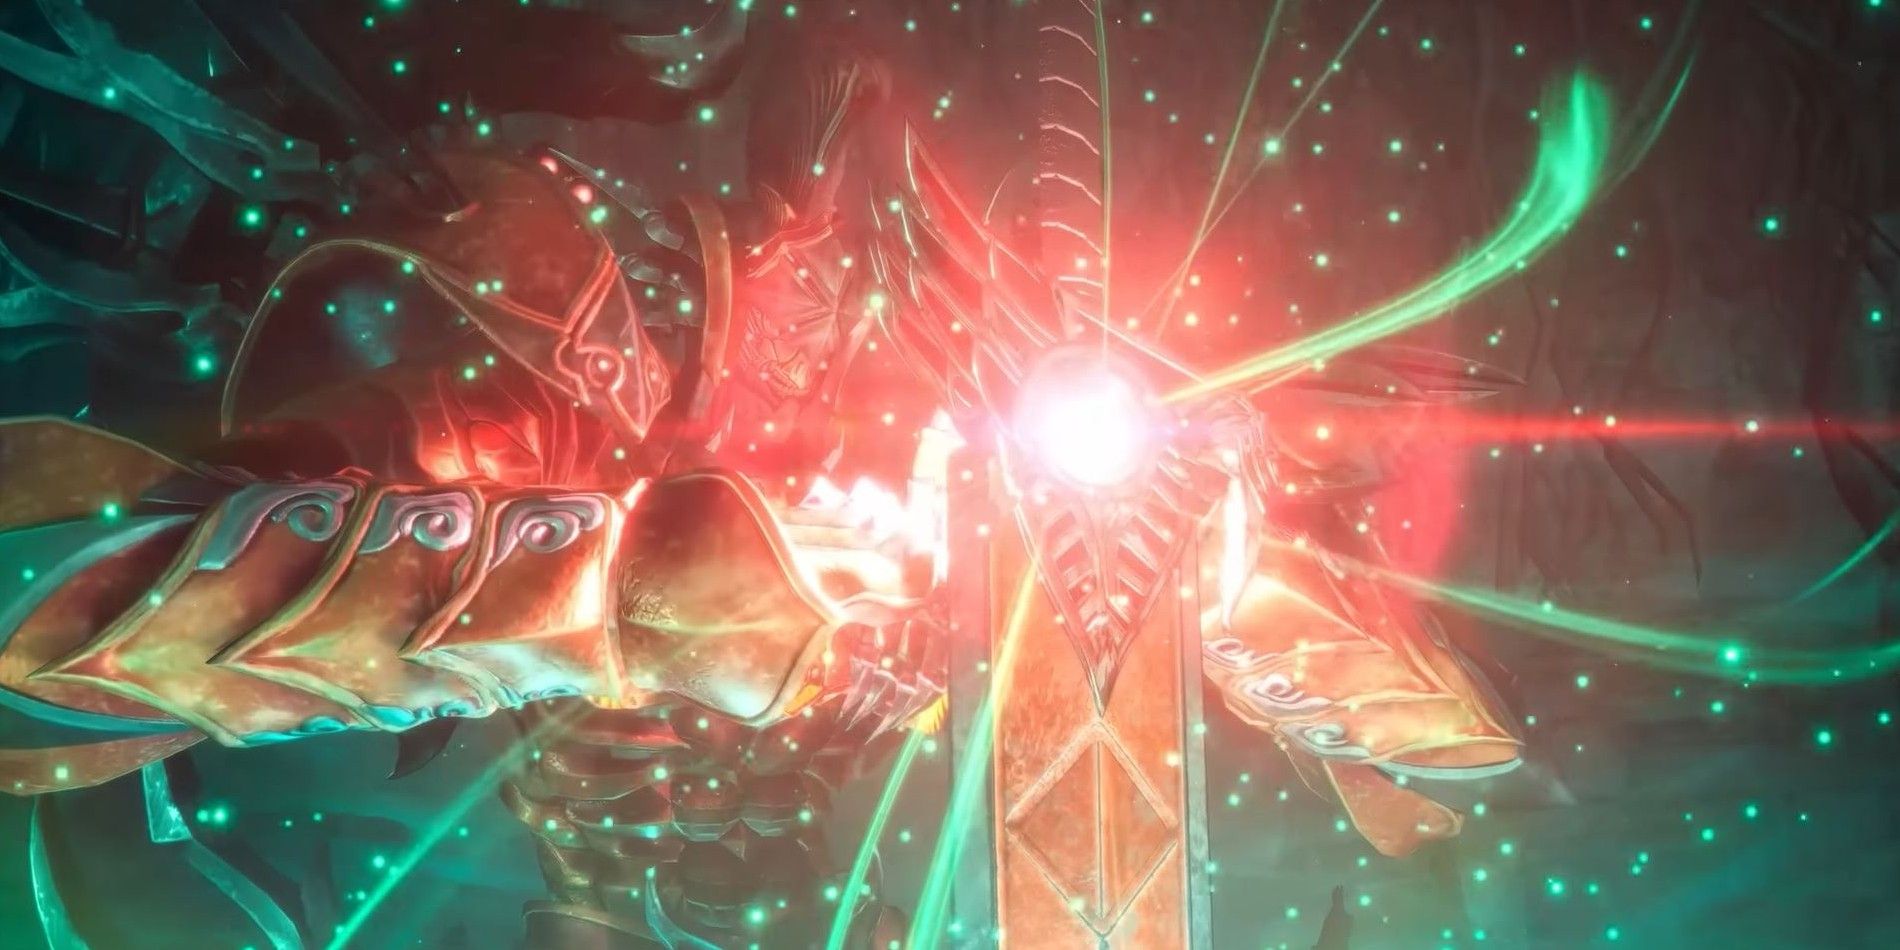 Screenshot of the Genesis Avatar boss fight in Crisis Core: Final Fantasy 7 - Reunion. An armored figure wields a sword emitting red and green beams.